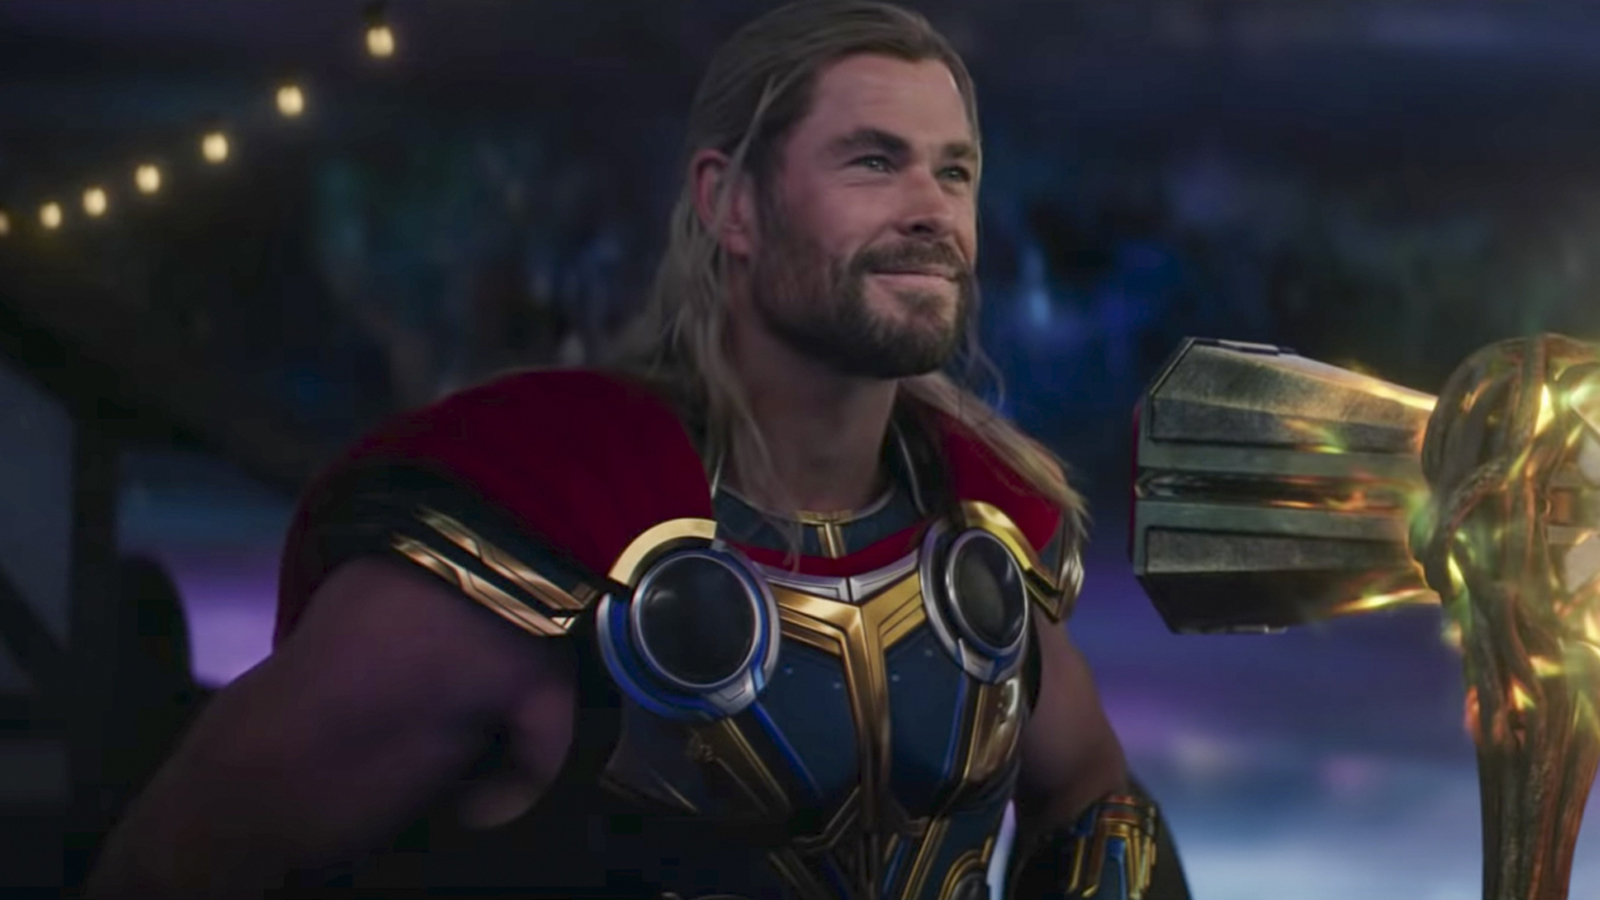 Chris Hemsworth says he will return as Thor on one condition